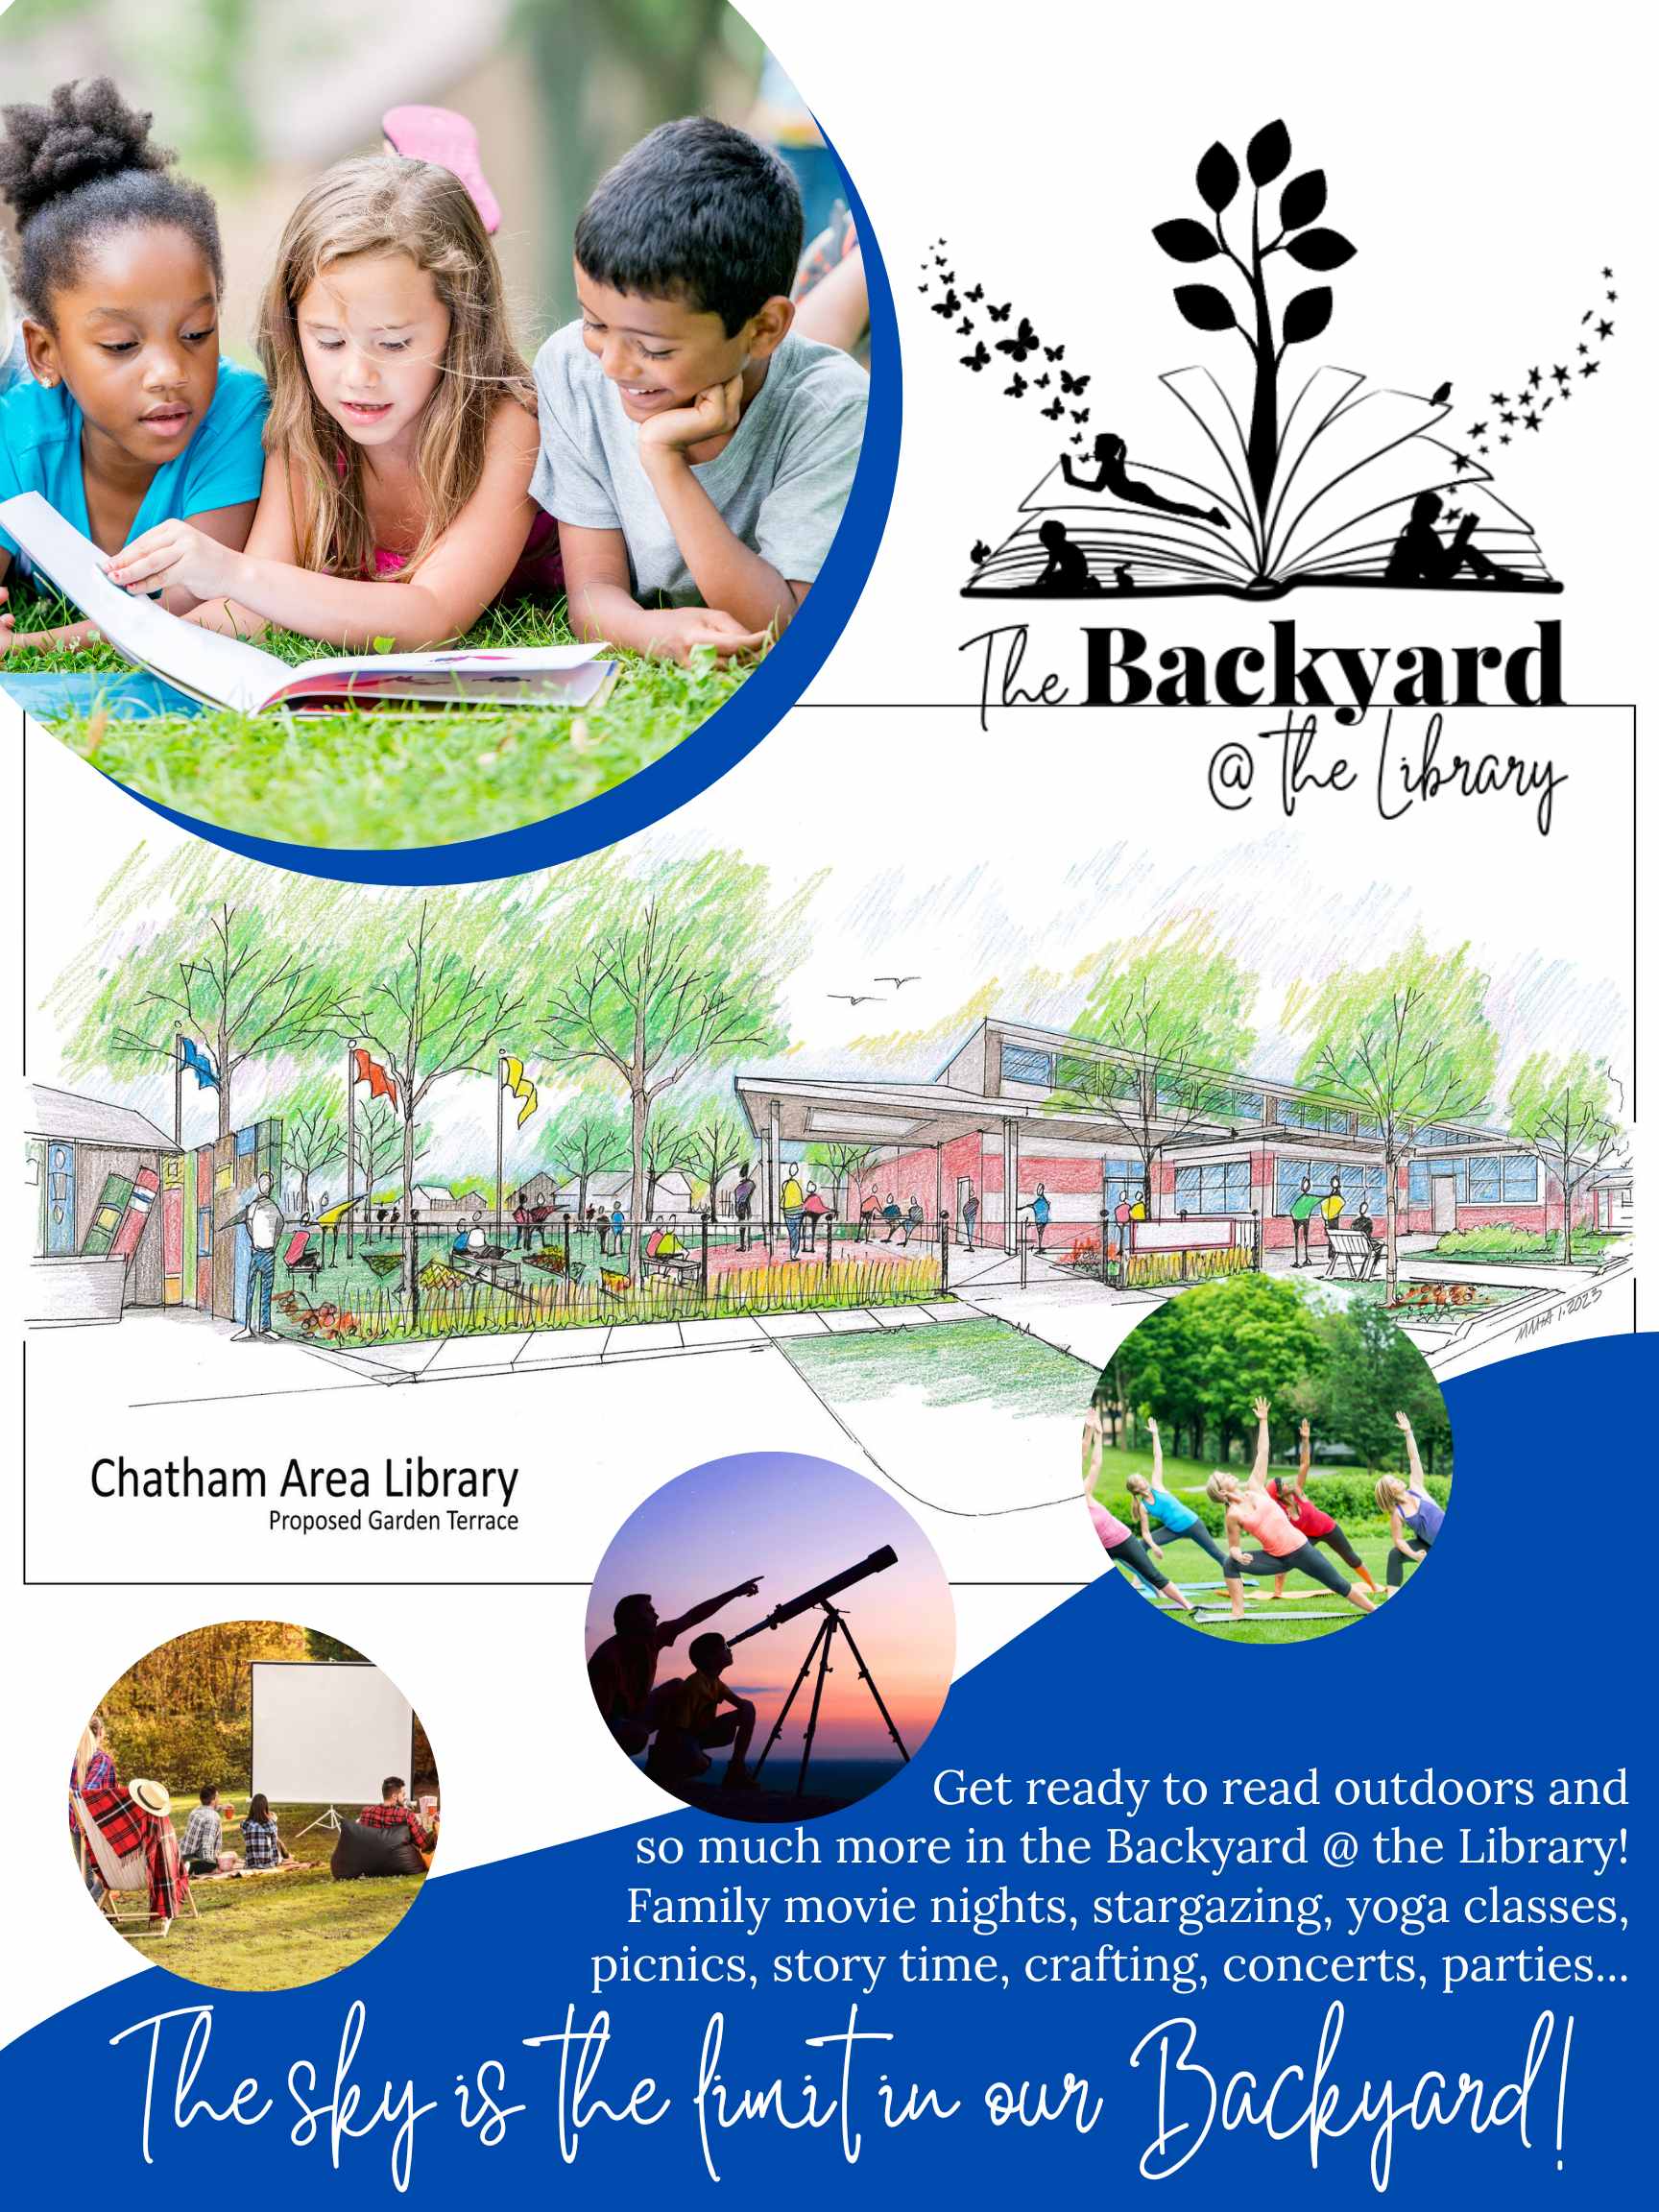 This is the ad for the Backyard at the Library fundraiser